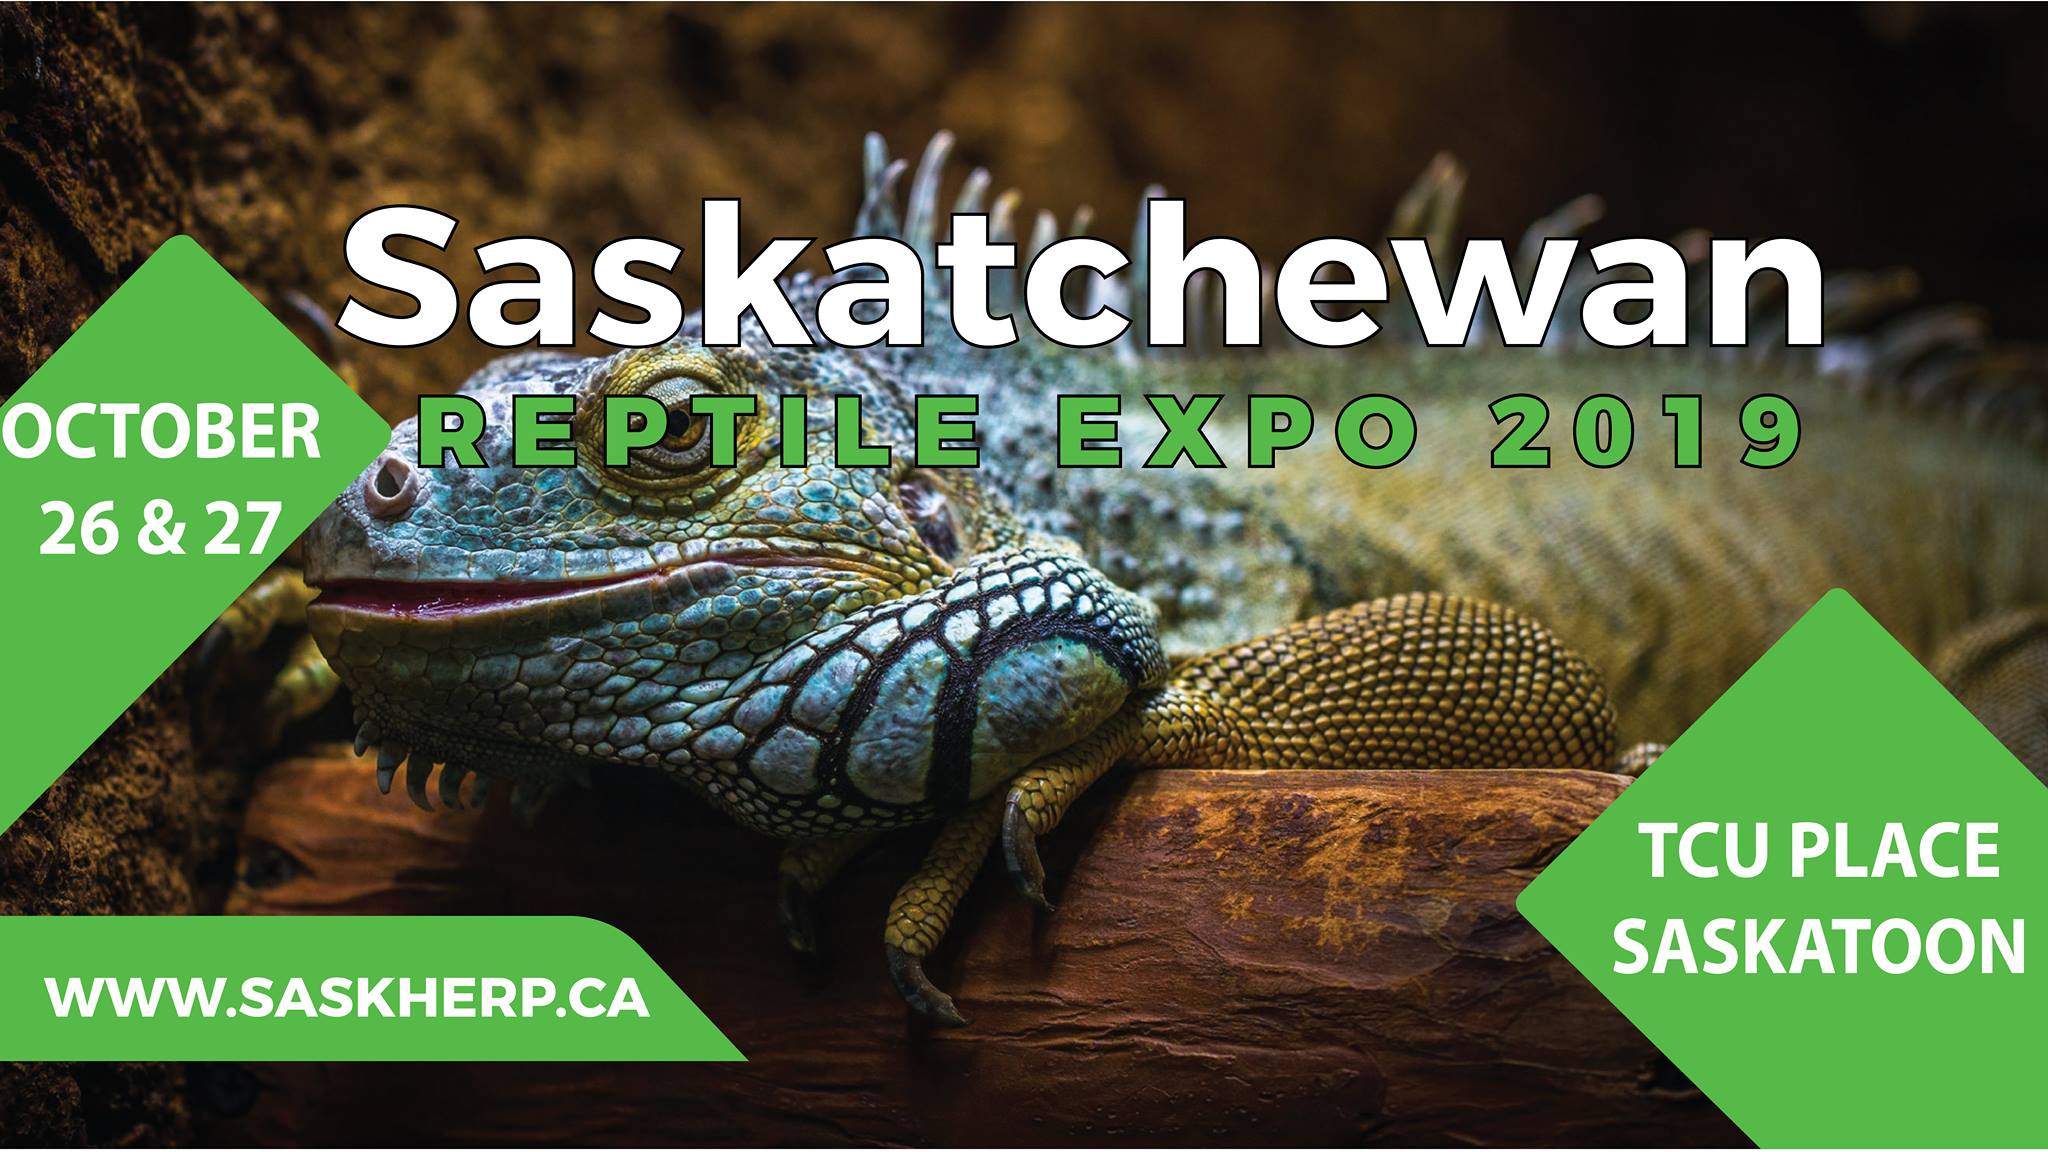 Going to be Awessssssome Sssssauce at the Saskatchewan Reptile Show